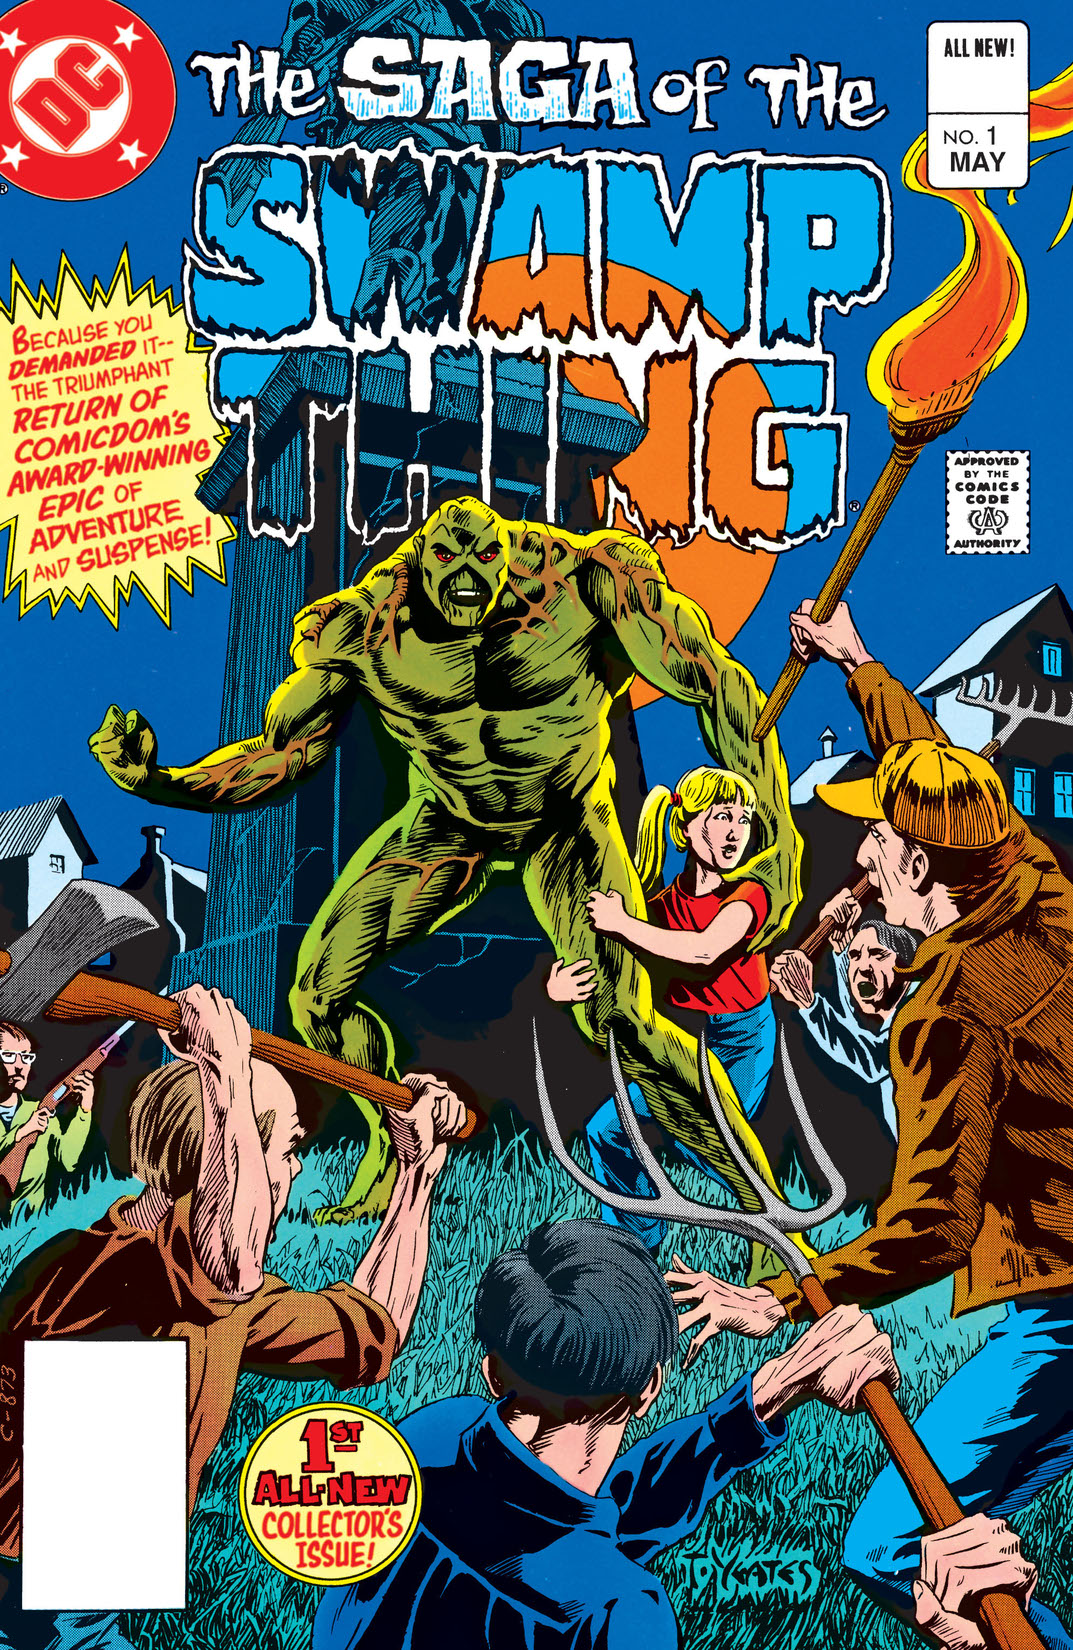 The Saga of the Swamp Thing (1982-) #1 preview images